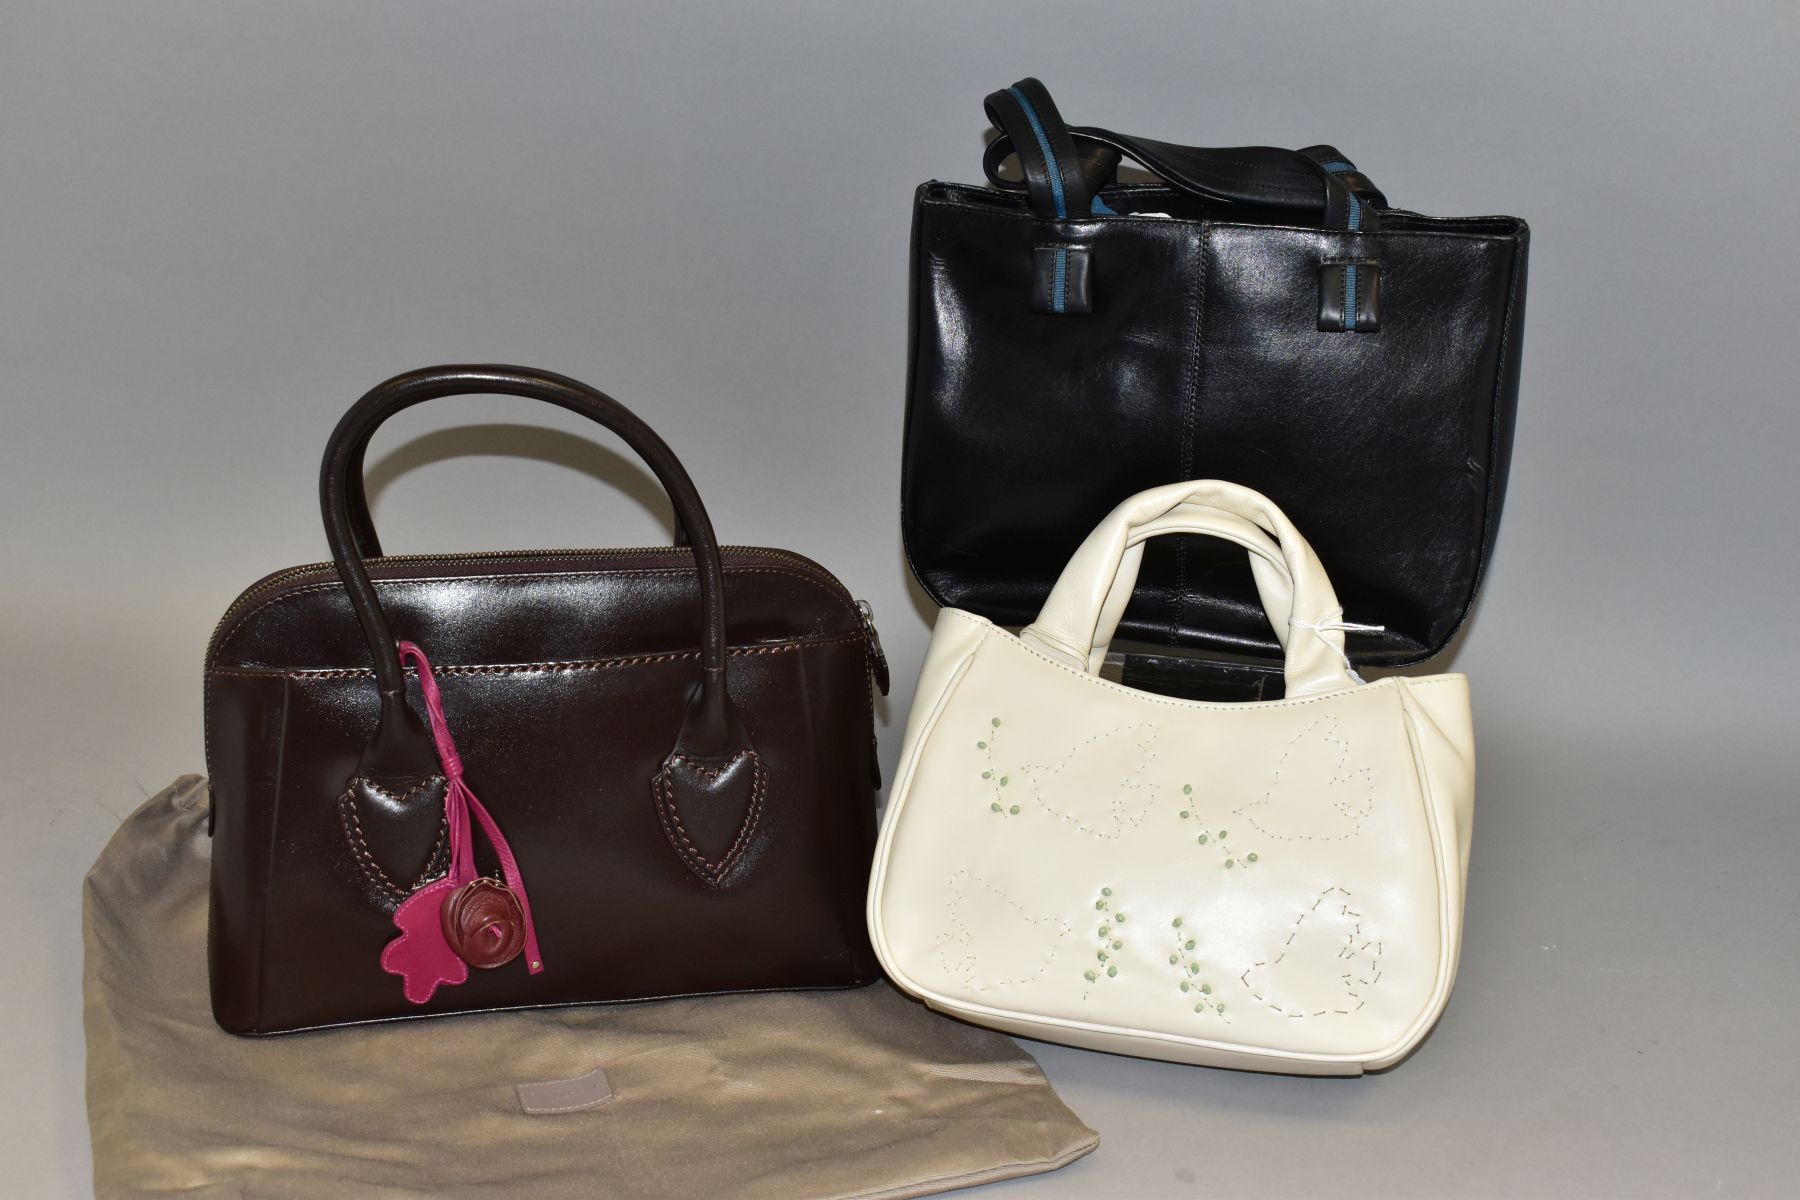 THREE RADLEY HANDBAGS, comprising a cream leather bag with stitched outlines of doves and olive - Image 2 of 3